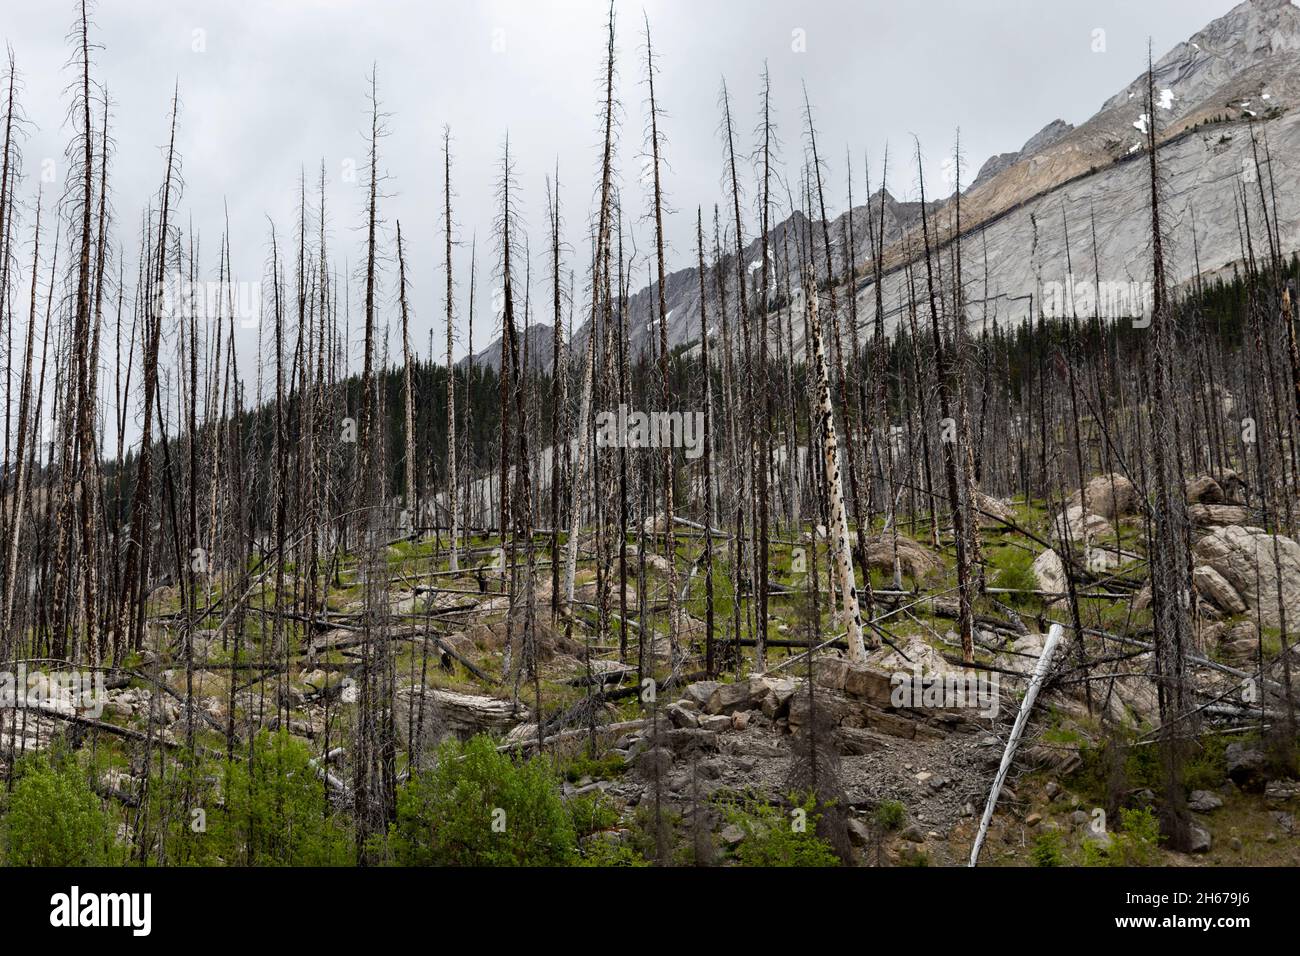 Burnt trees, years after forest first destroyed acres of surrounding forest. Still standing, forest floor greenery starting to grow back. Mountains Stock Photo